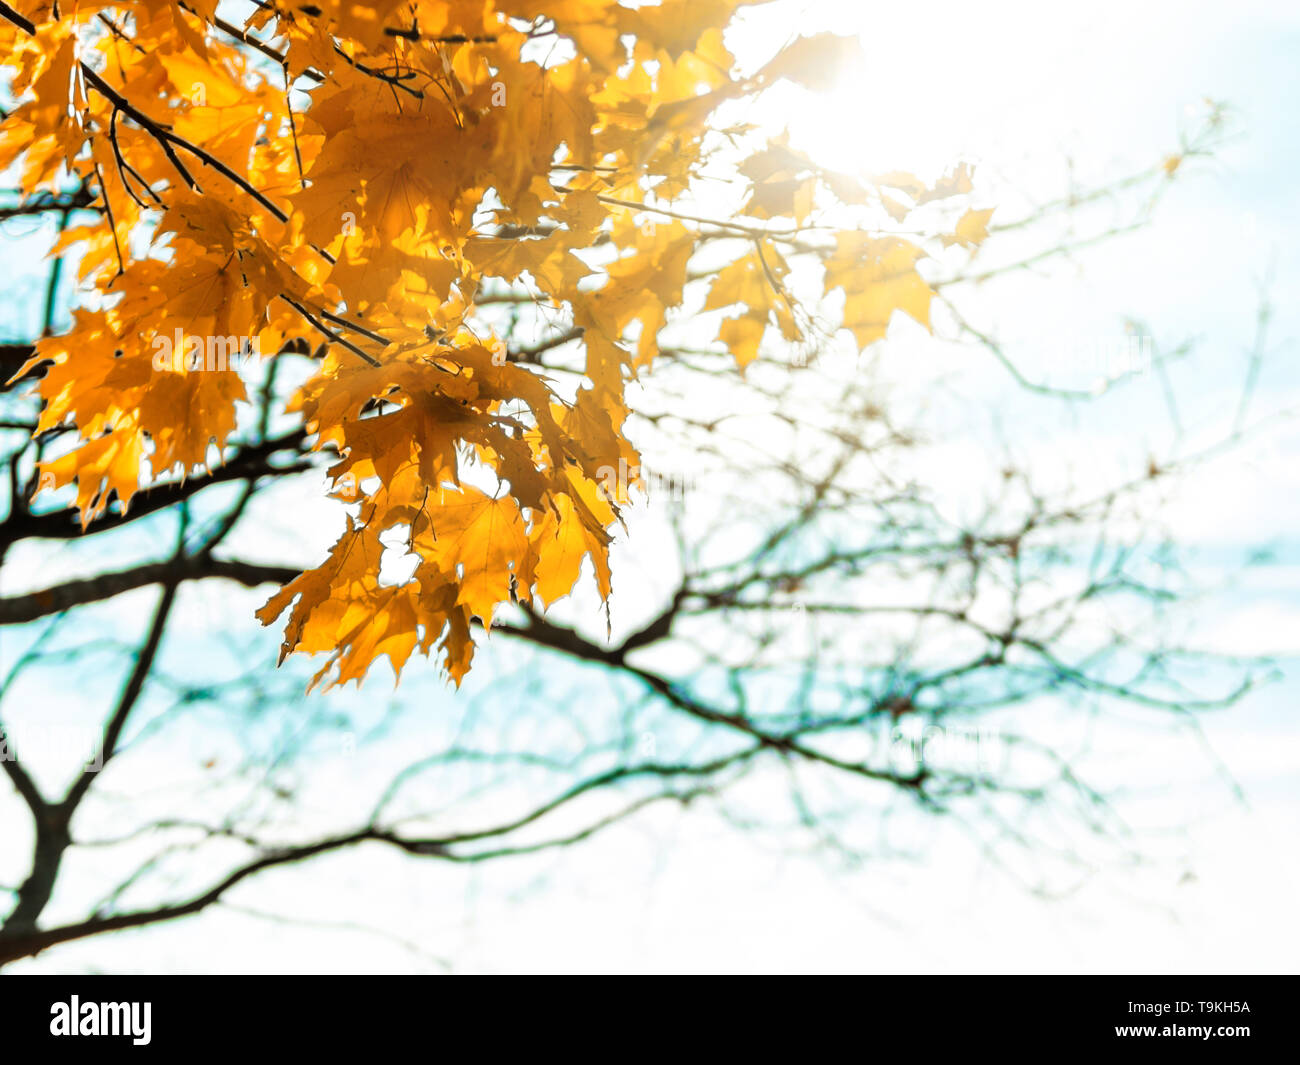 Autumn park. Beautiful yellow maple leaves on branch and sunlight. Autumn natural background. Falling foliage with sun flares, fall trail landscape. Copy space for text Stock Photo